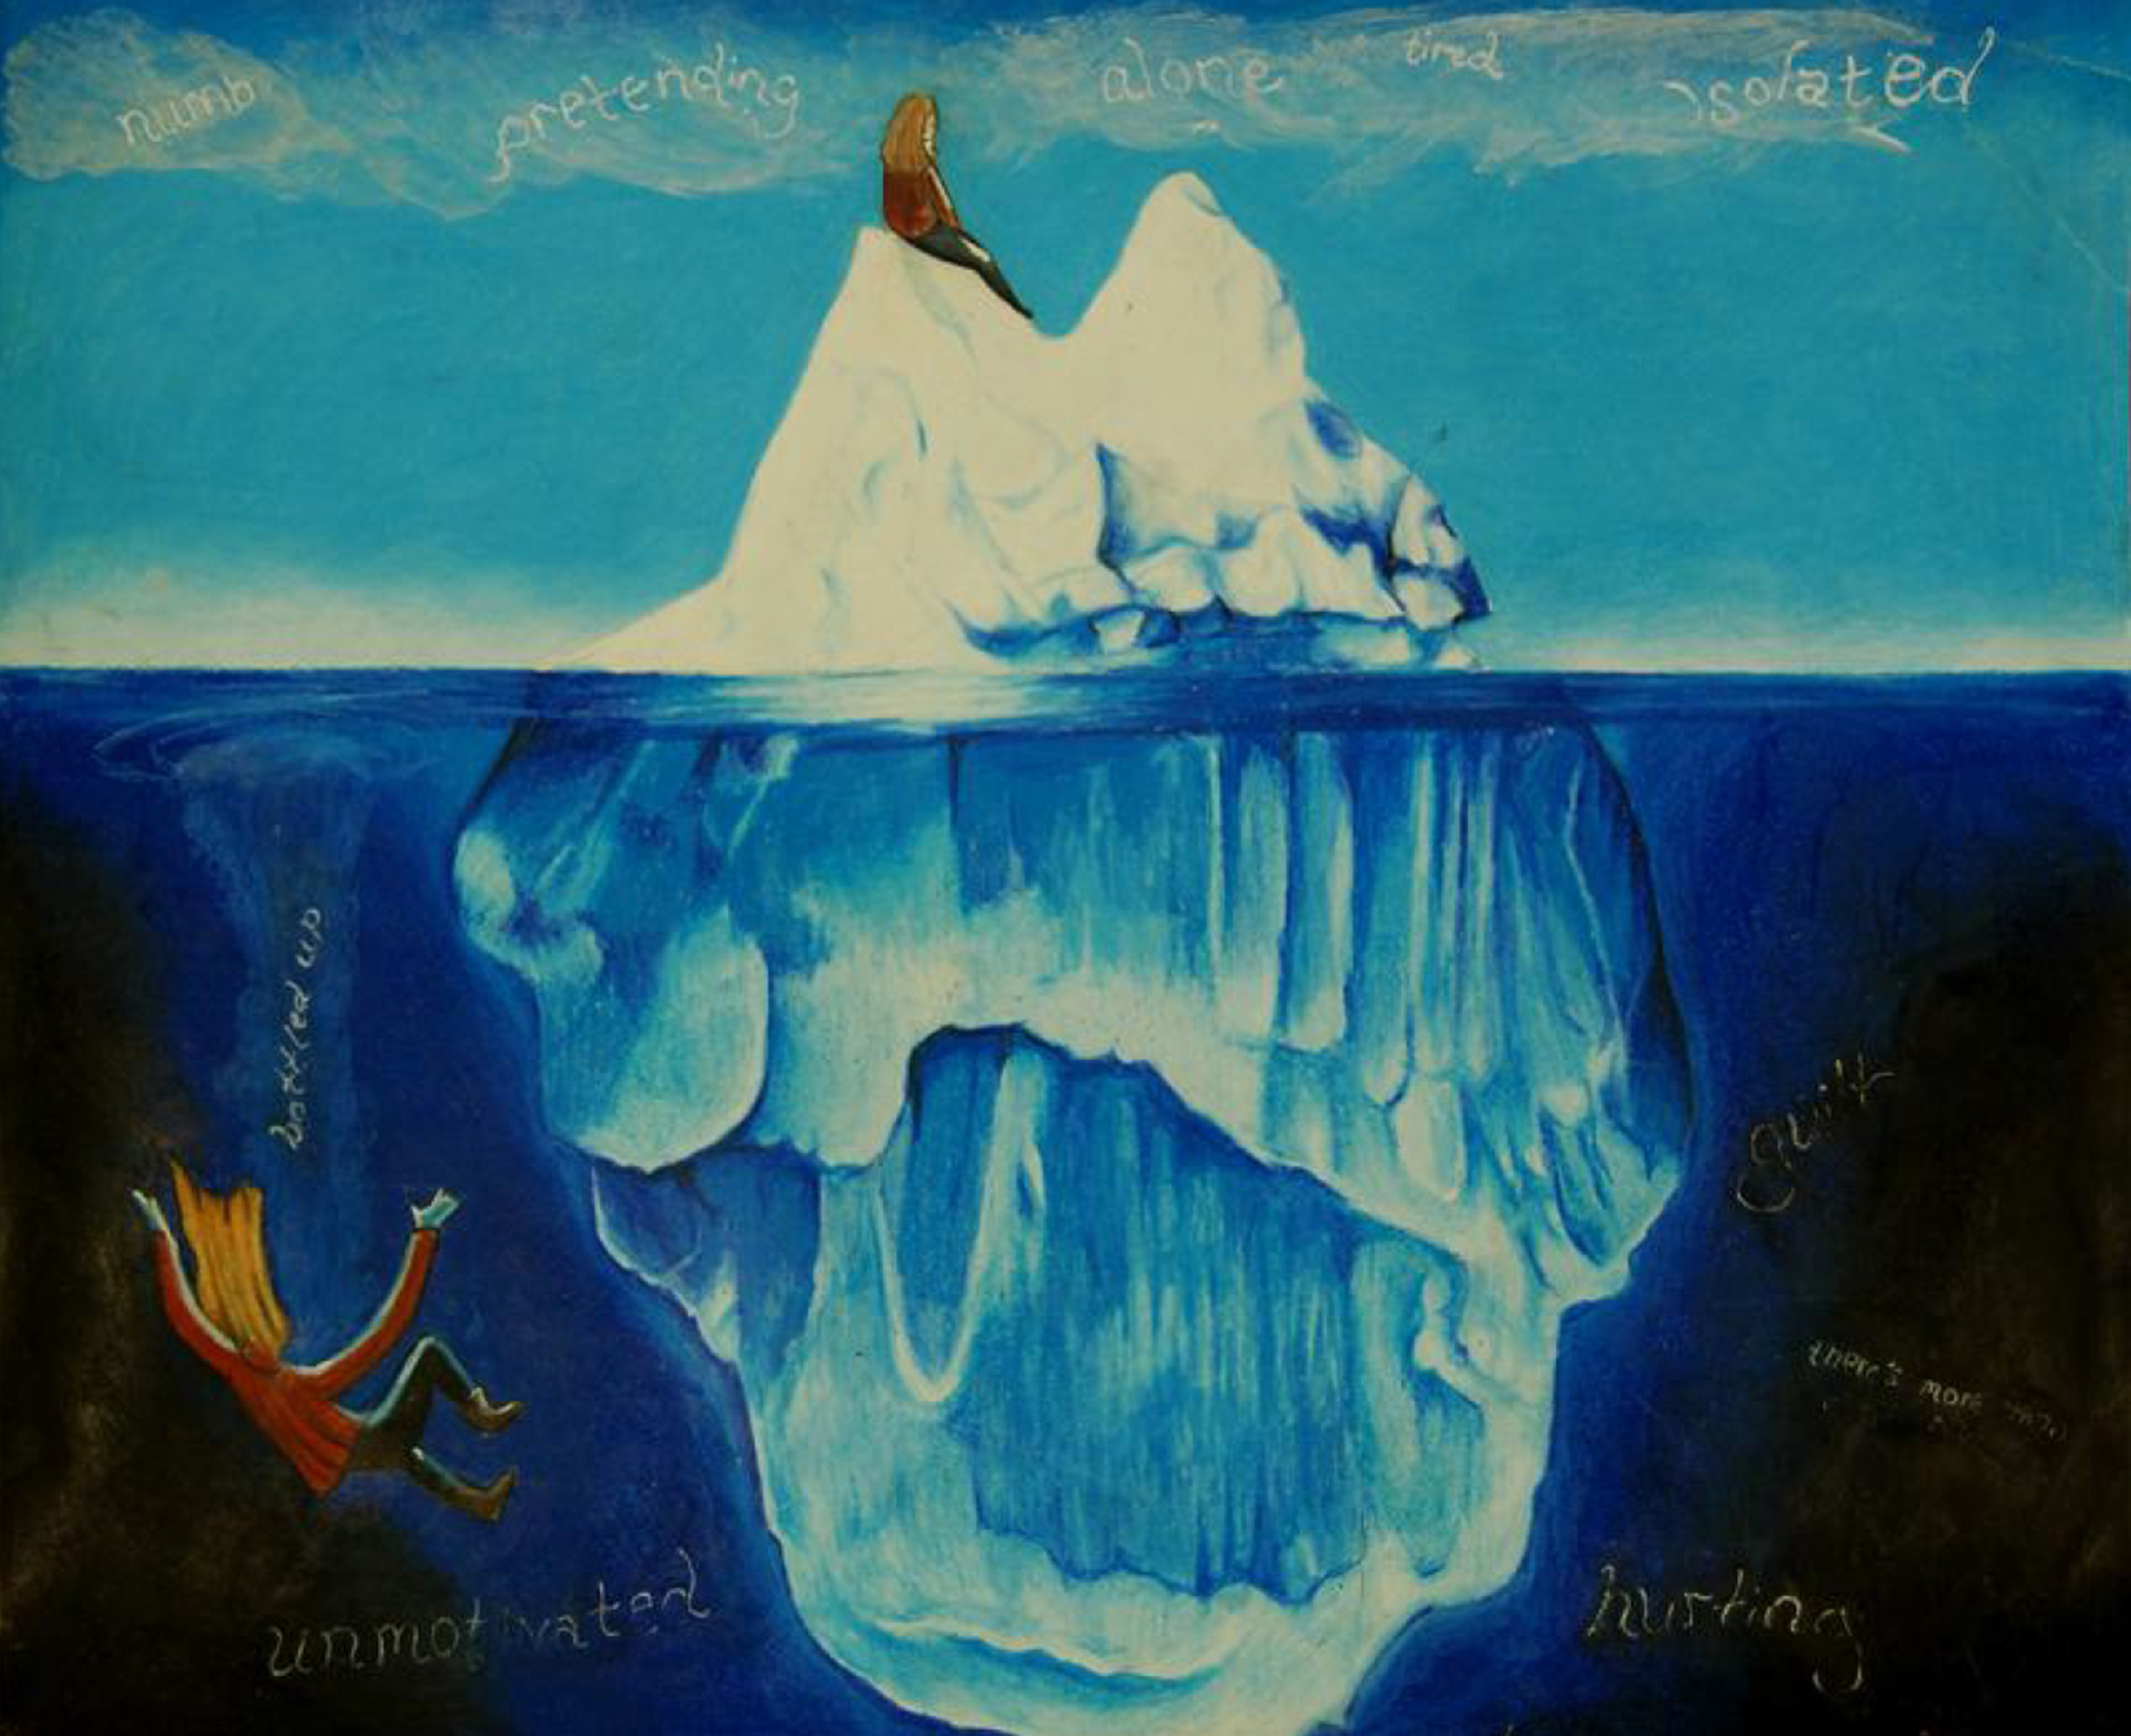 Drawing of an iceberg seen from the side, showing a piece above water and a larger chunk below water, with a young woman falling into the water on the left